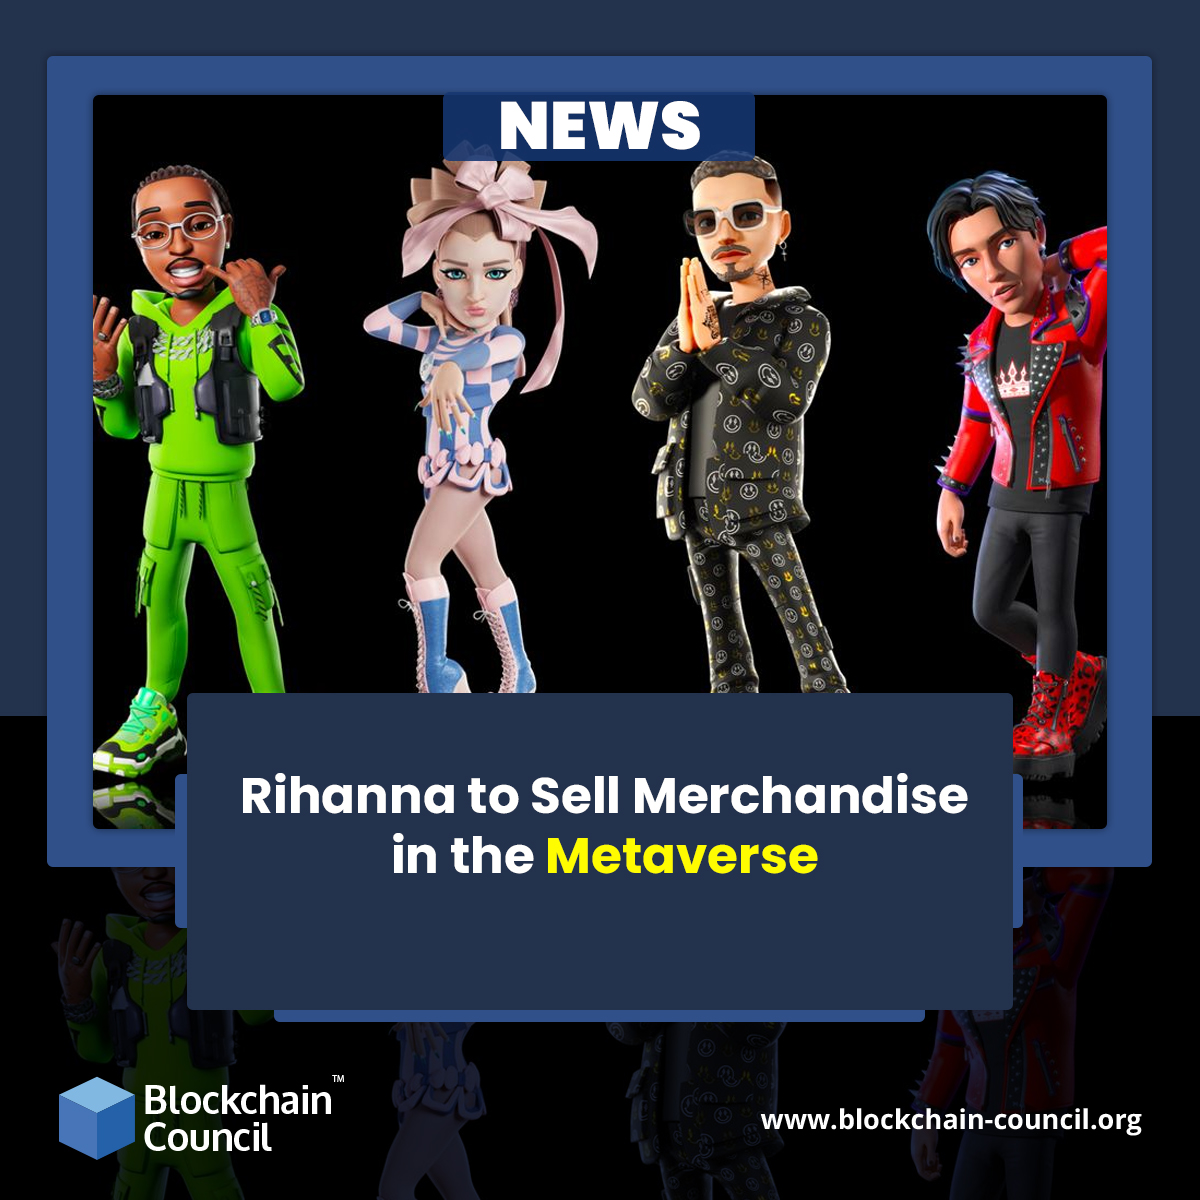 Rihanna to Sell Merchandise in the Metaverse